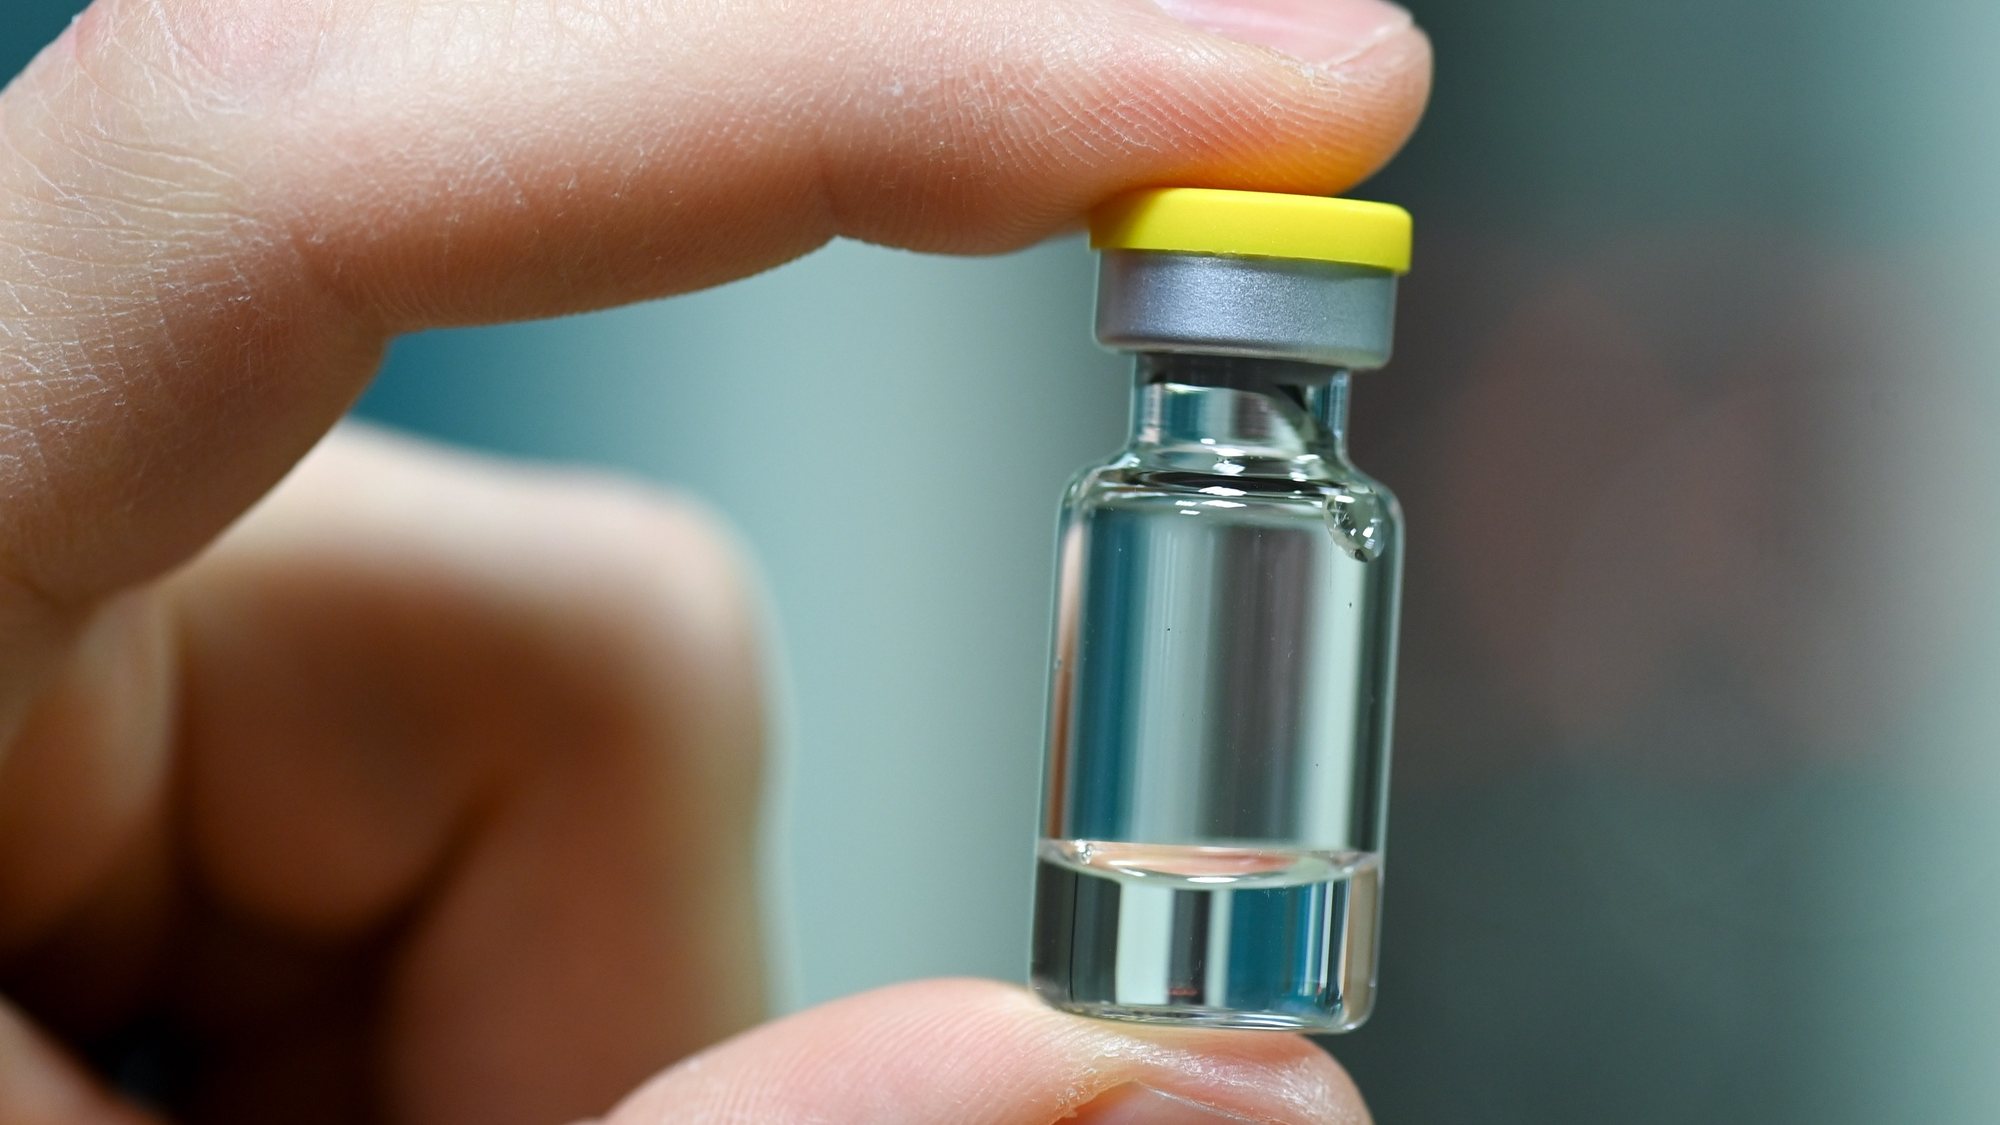 epa08837600 An employee holds an ampoule into which the vaccine is later filled at the vaccine manufacturer IDT Biologika&#039;s plant in Dessau-Rosslau, Germany, 23 November 2020. German Health Minister Jens Spahn announced the planned purchase of five million coronavirus vaccine doses. According to the scientific director, IDT expects to go into commercial production of the coronavirus vaccine in the middle of next year.  EPA/HENDRIK SCHMIDT / POOL